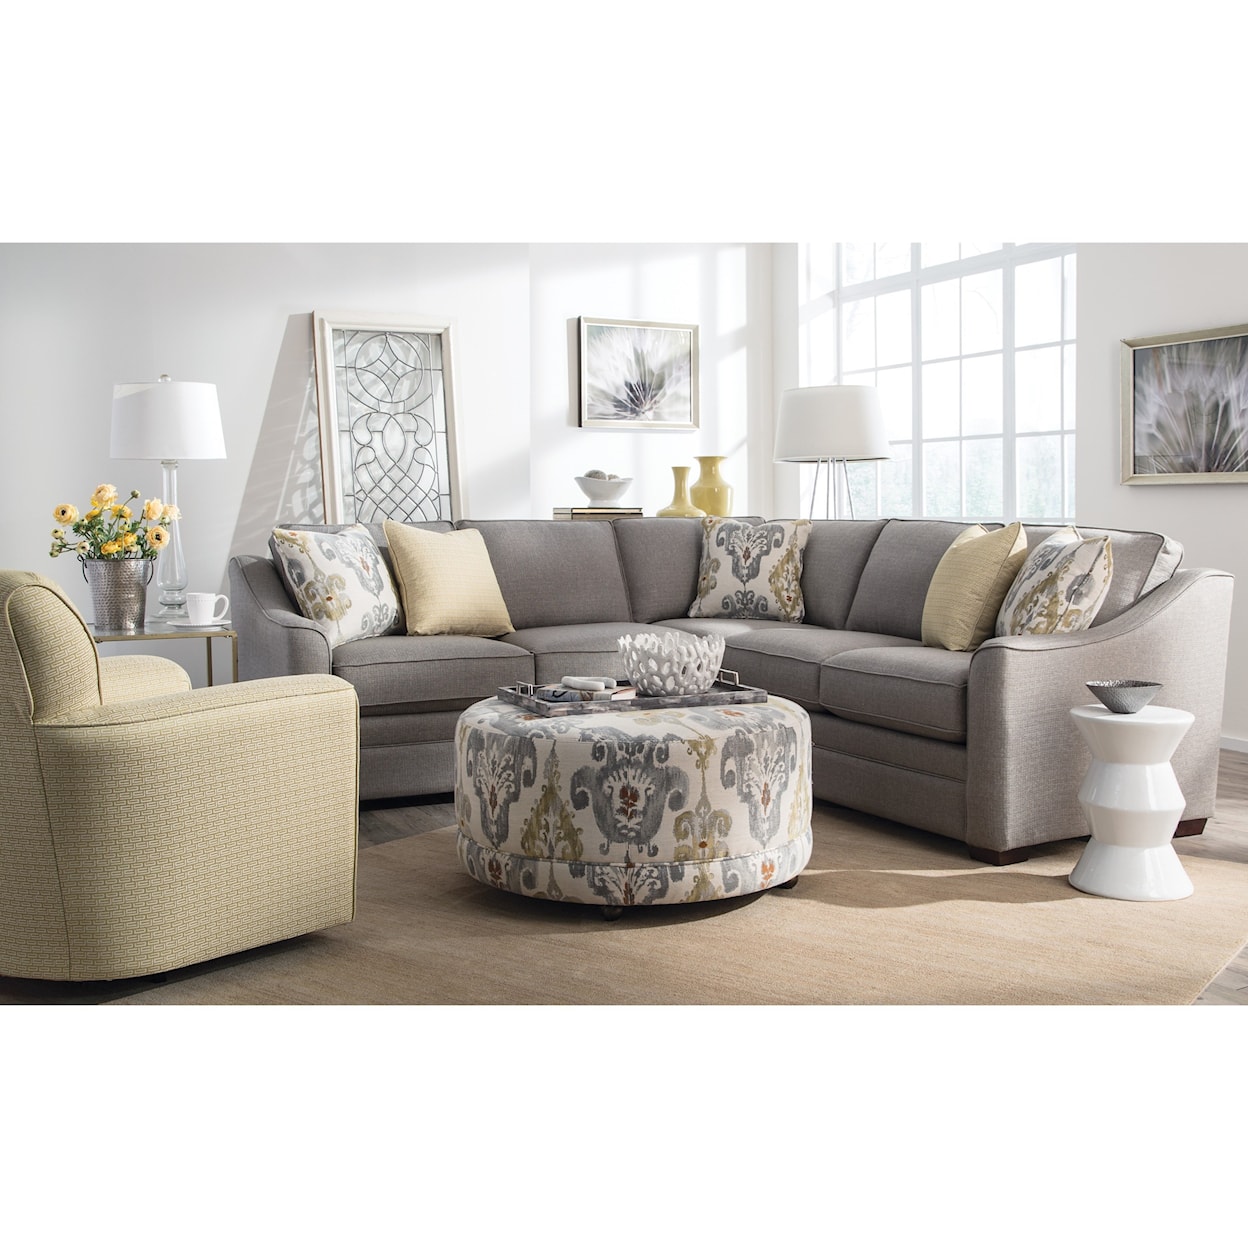 Craftmaster F9 Series Living Room Group